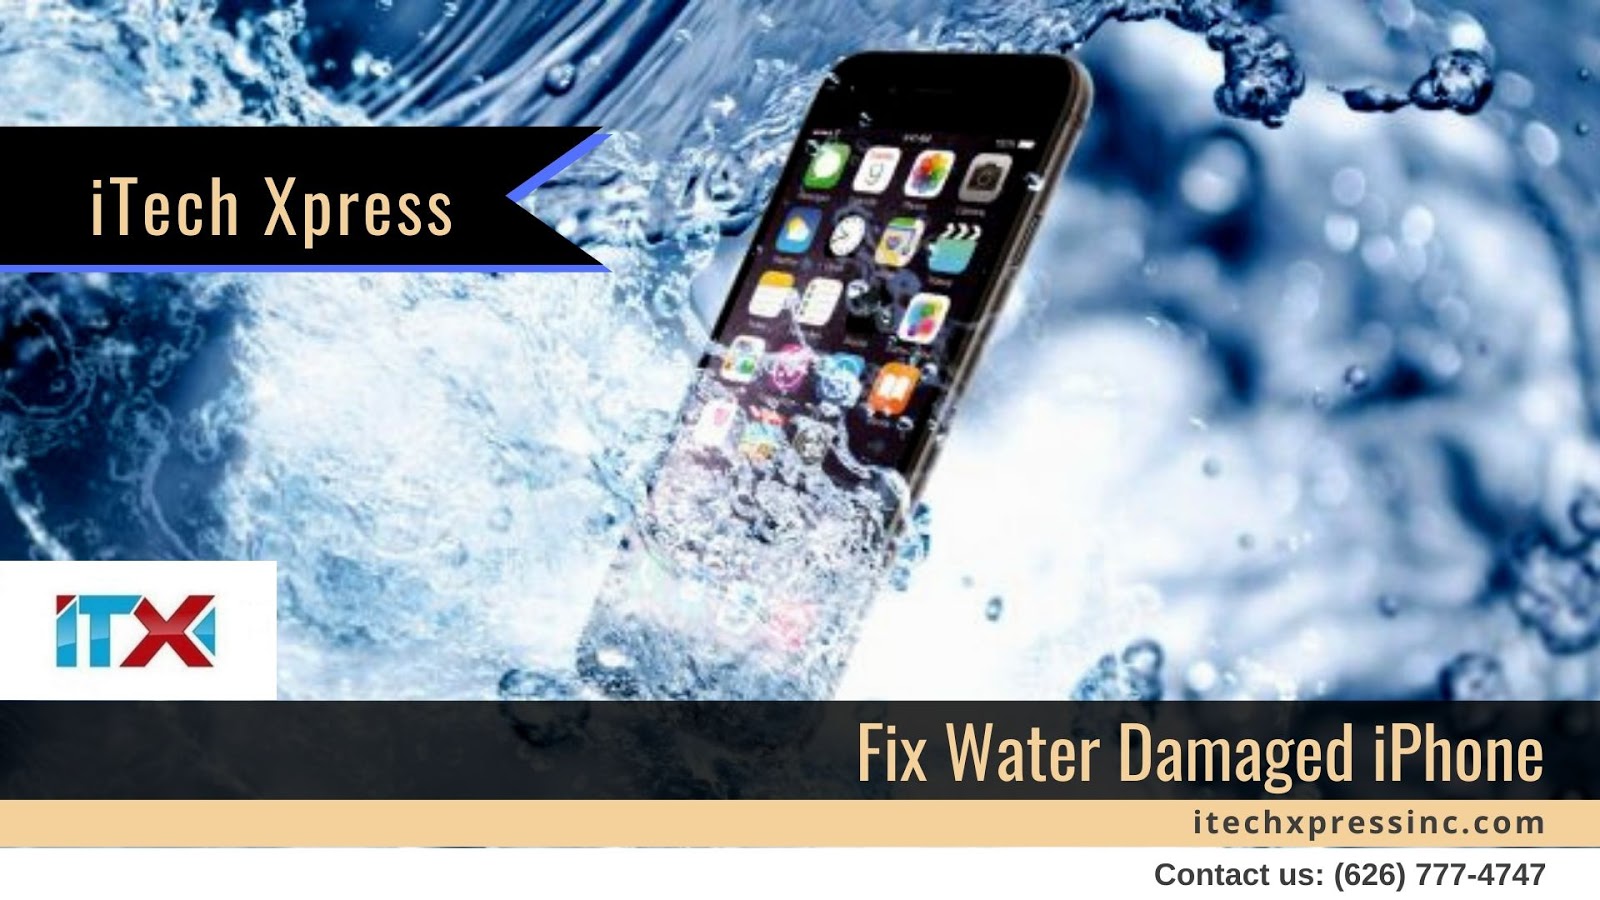 Fix Water Damaged iPhone